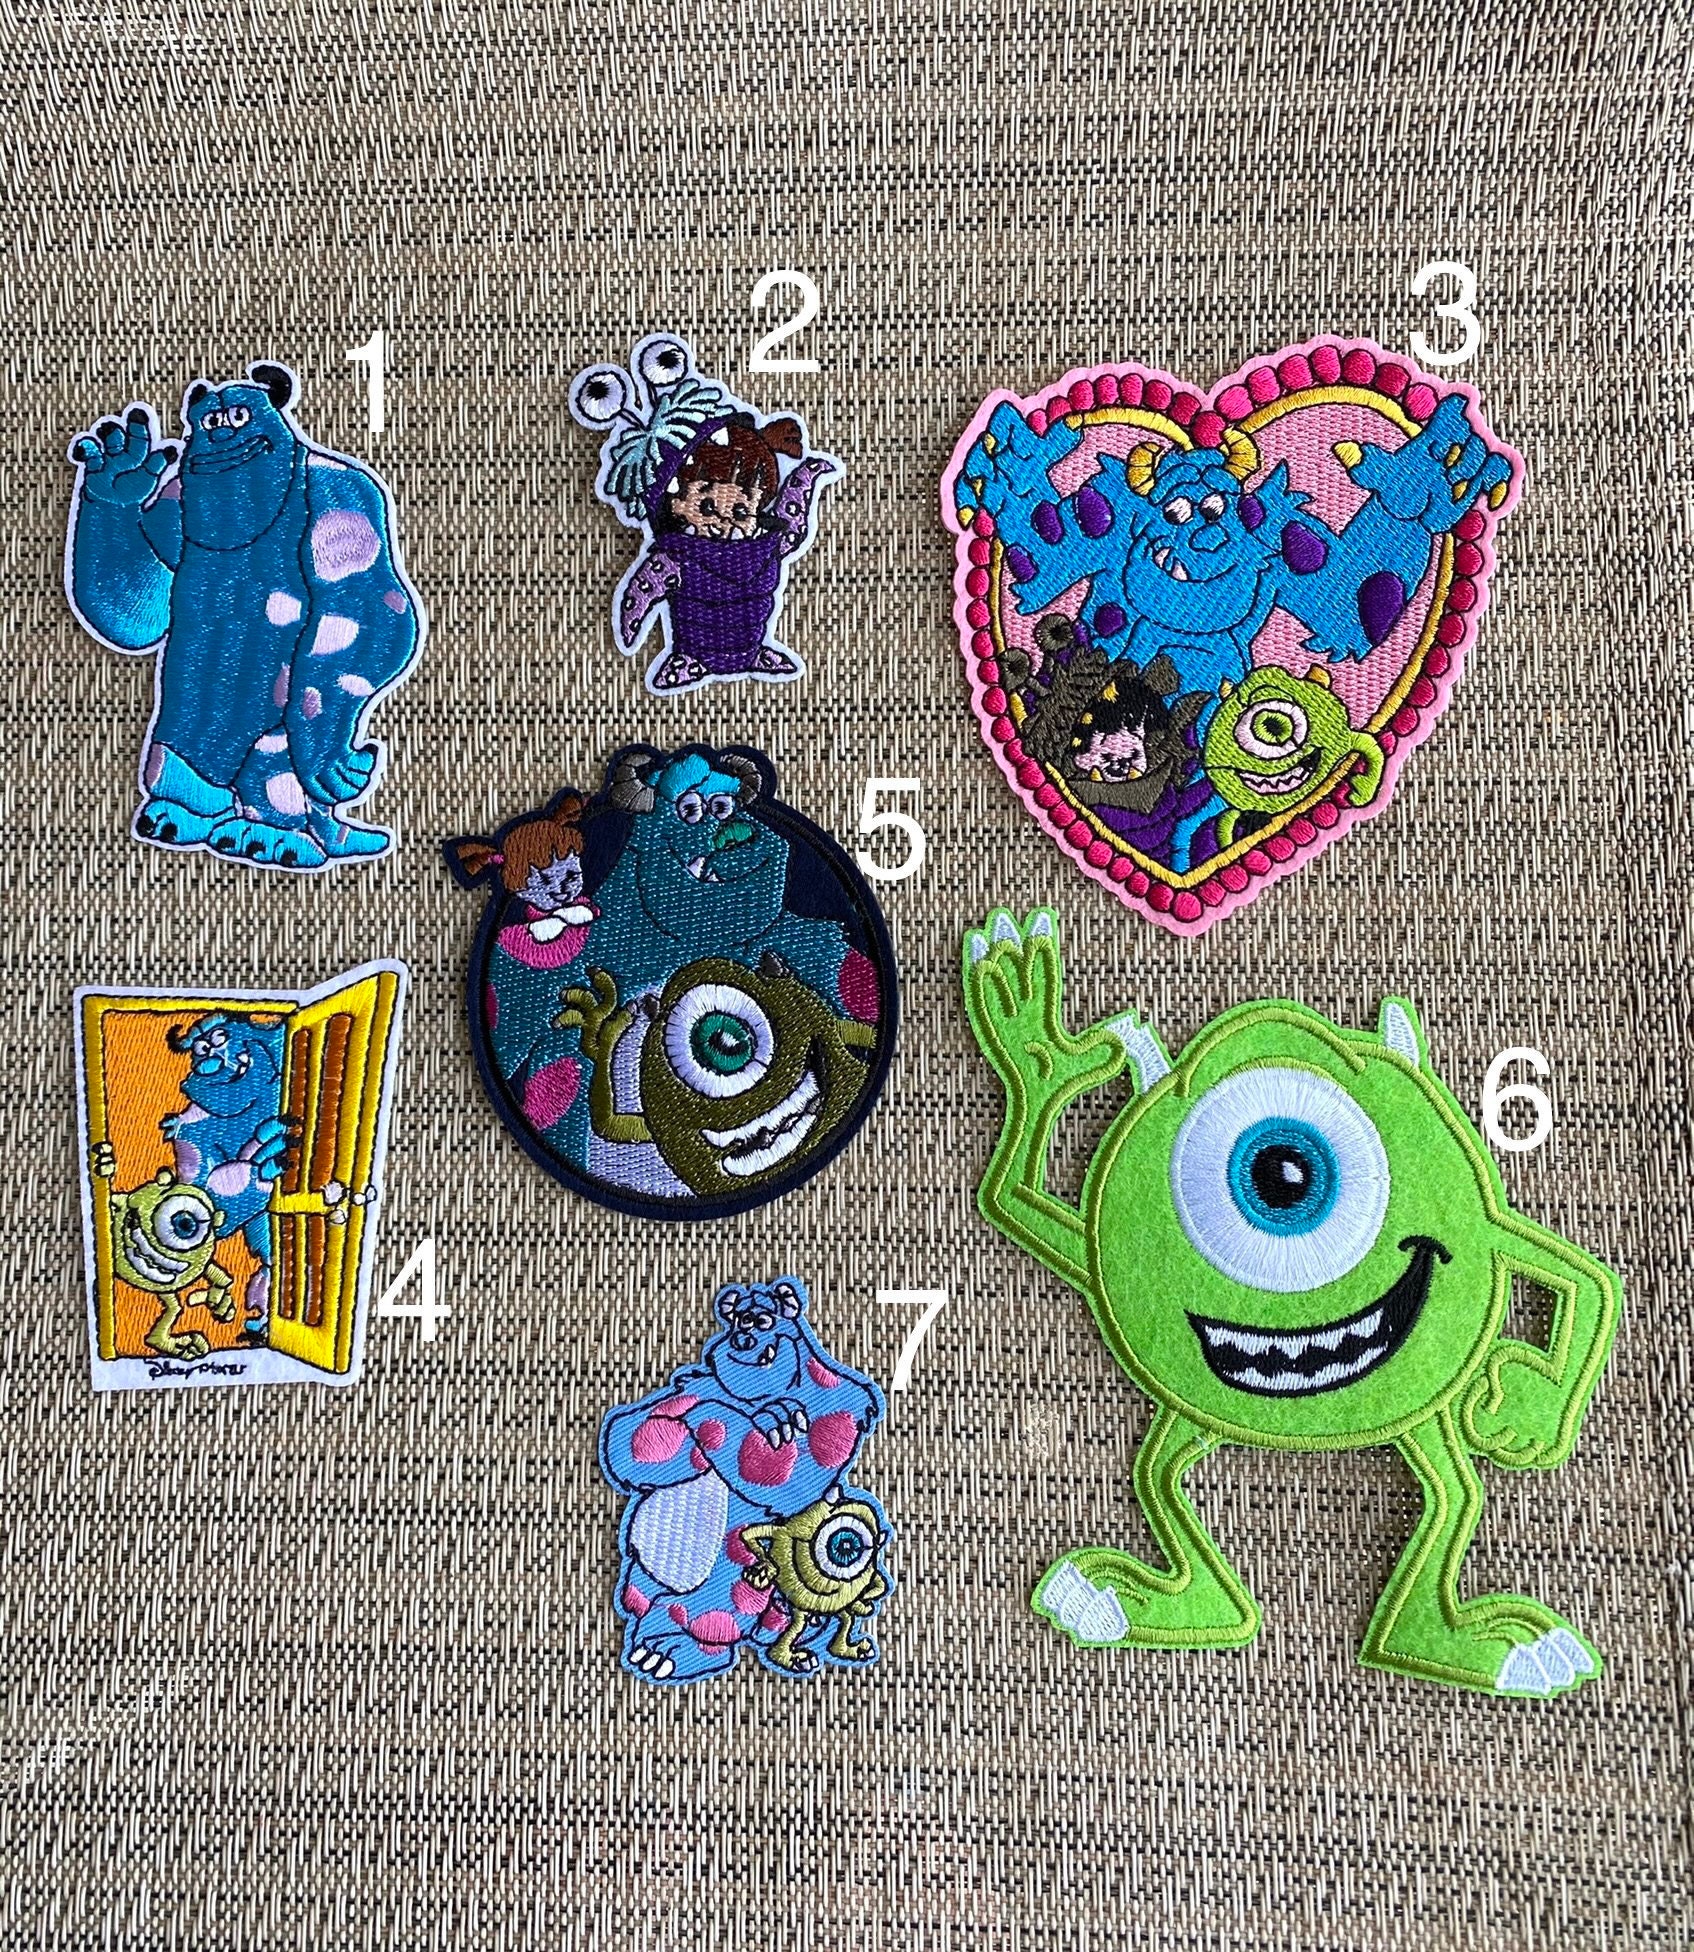 Mike & Sulley Monster's Inc Iron-On Patches, Hobby Lobby